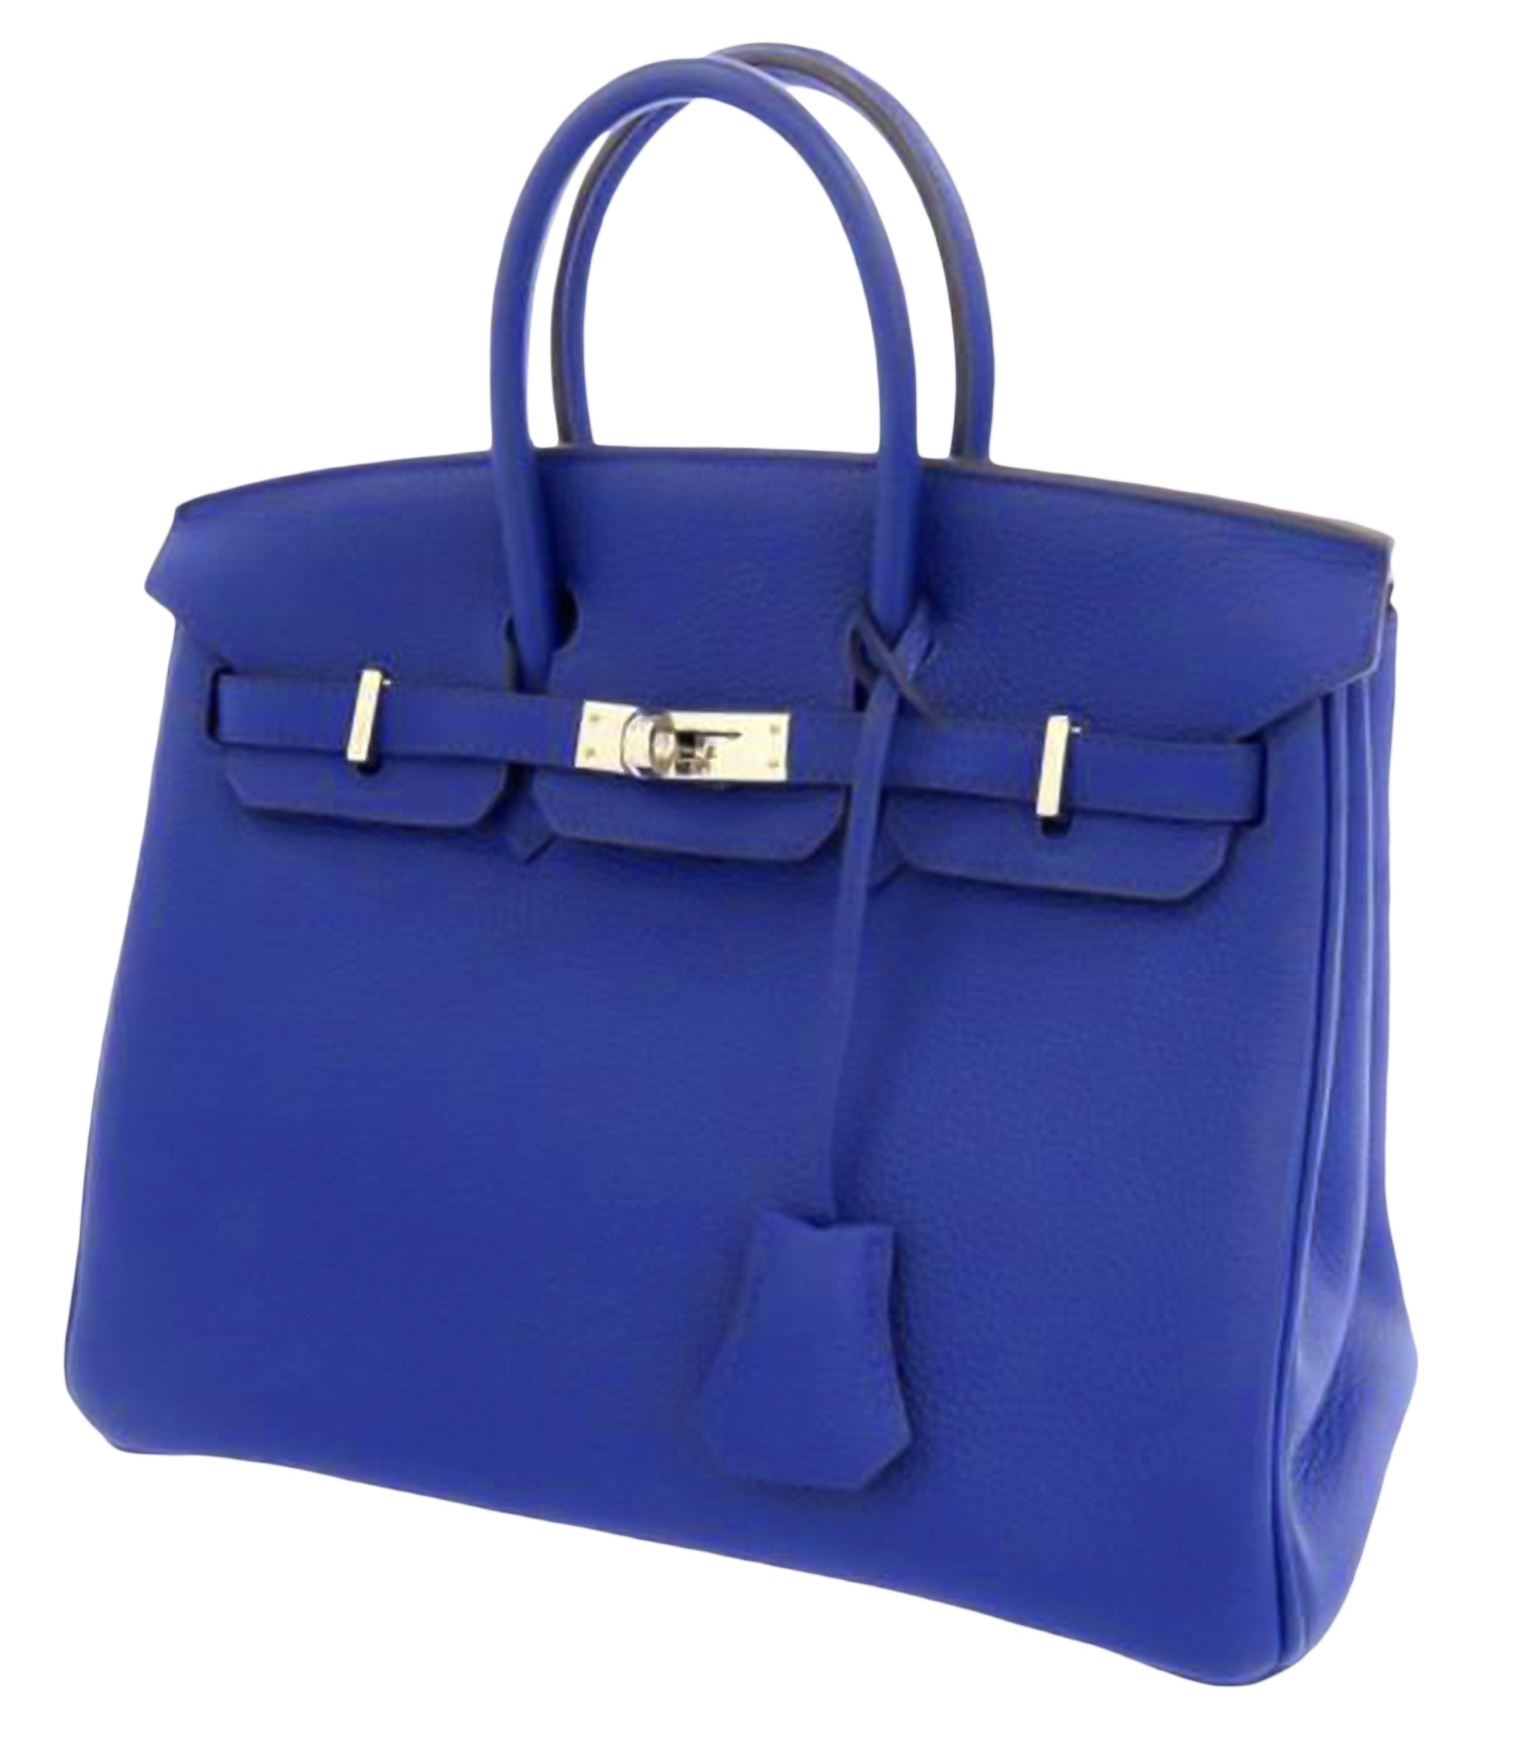 New Hermes Kelly 25 in Dusty Blue Colour, Eliza Armand